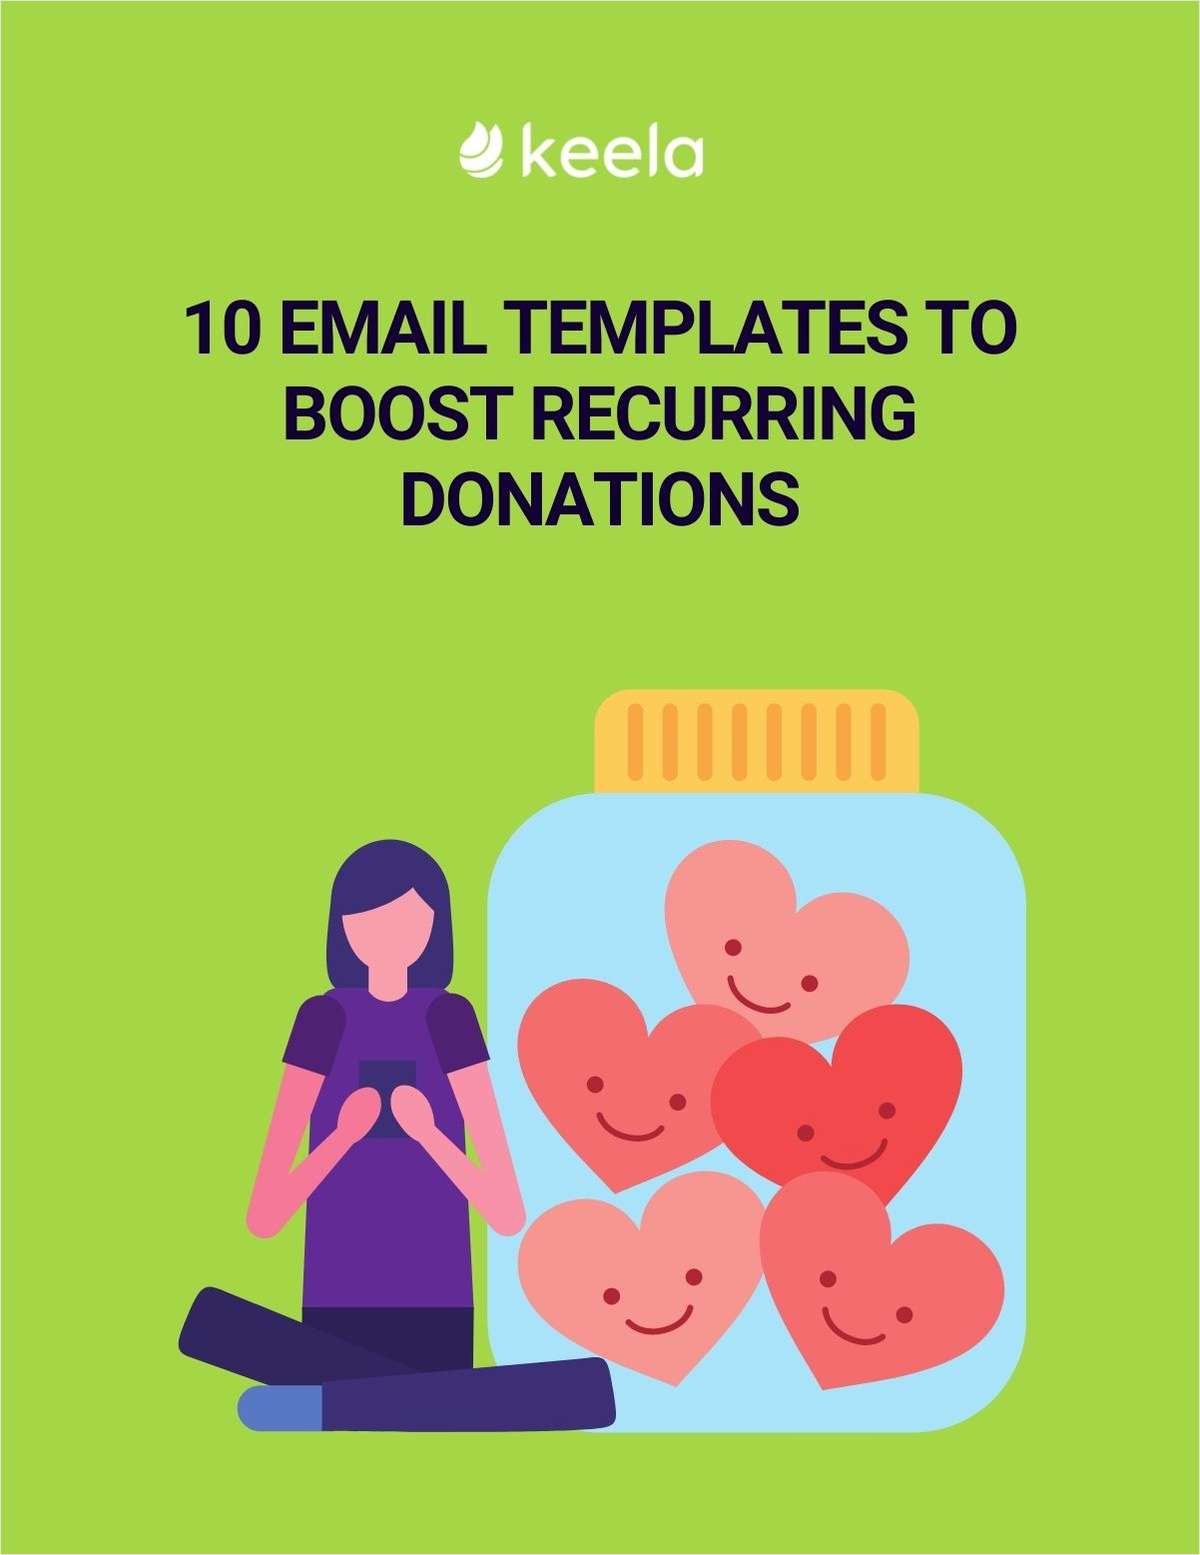 10 Email Templates to Boost Recurring Donations